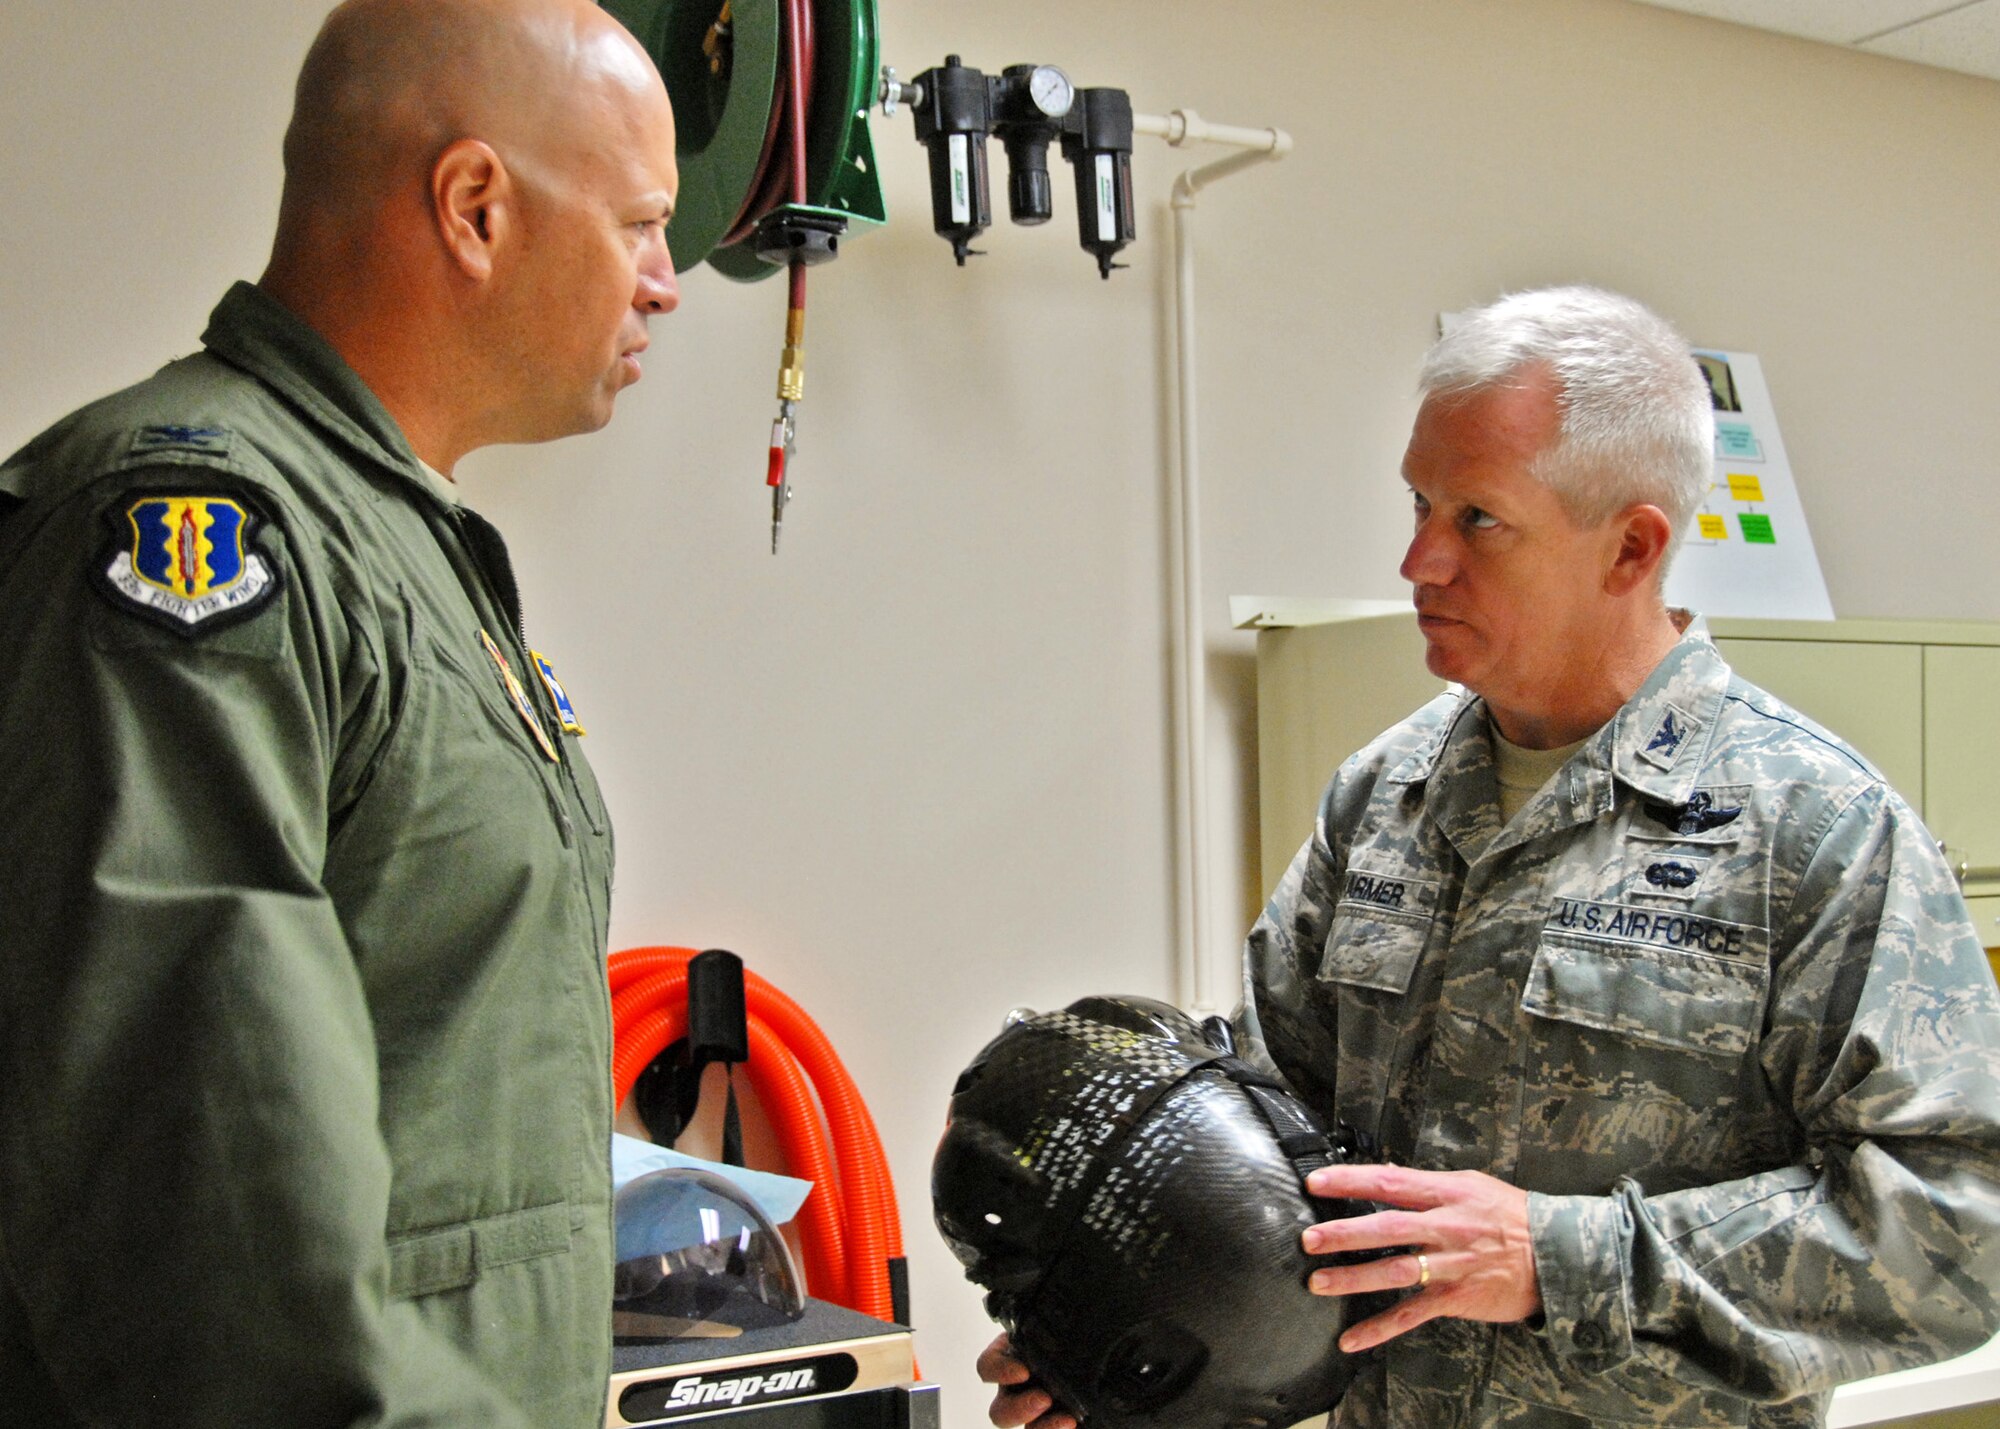 Col. David Htlacky, 33rd Fighter Wing commander, discusses the latest F-35 equipment innovations with his predecessor Col. Todd Harmer, former 33 FW commander, Sept 21 at Eglin Air Force Base, Fla.  (U.S. Air Force photo/Samuel King Jr.)